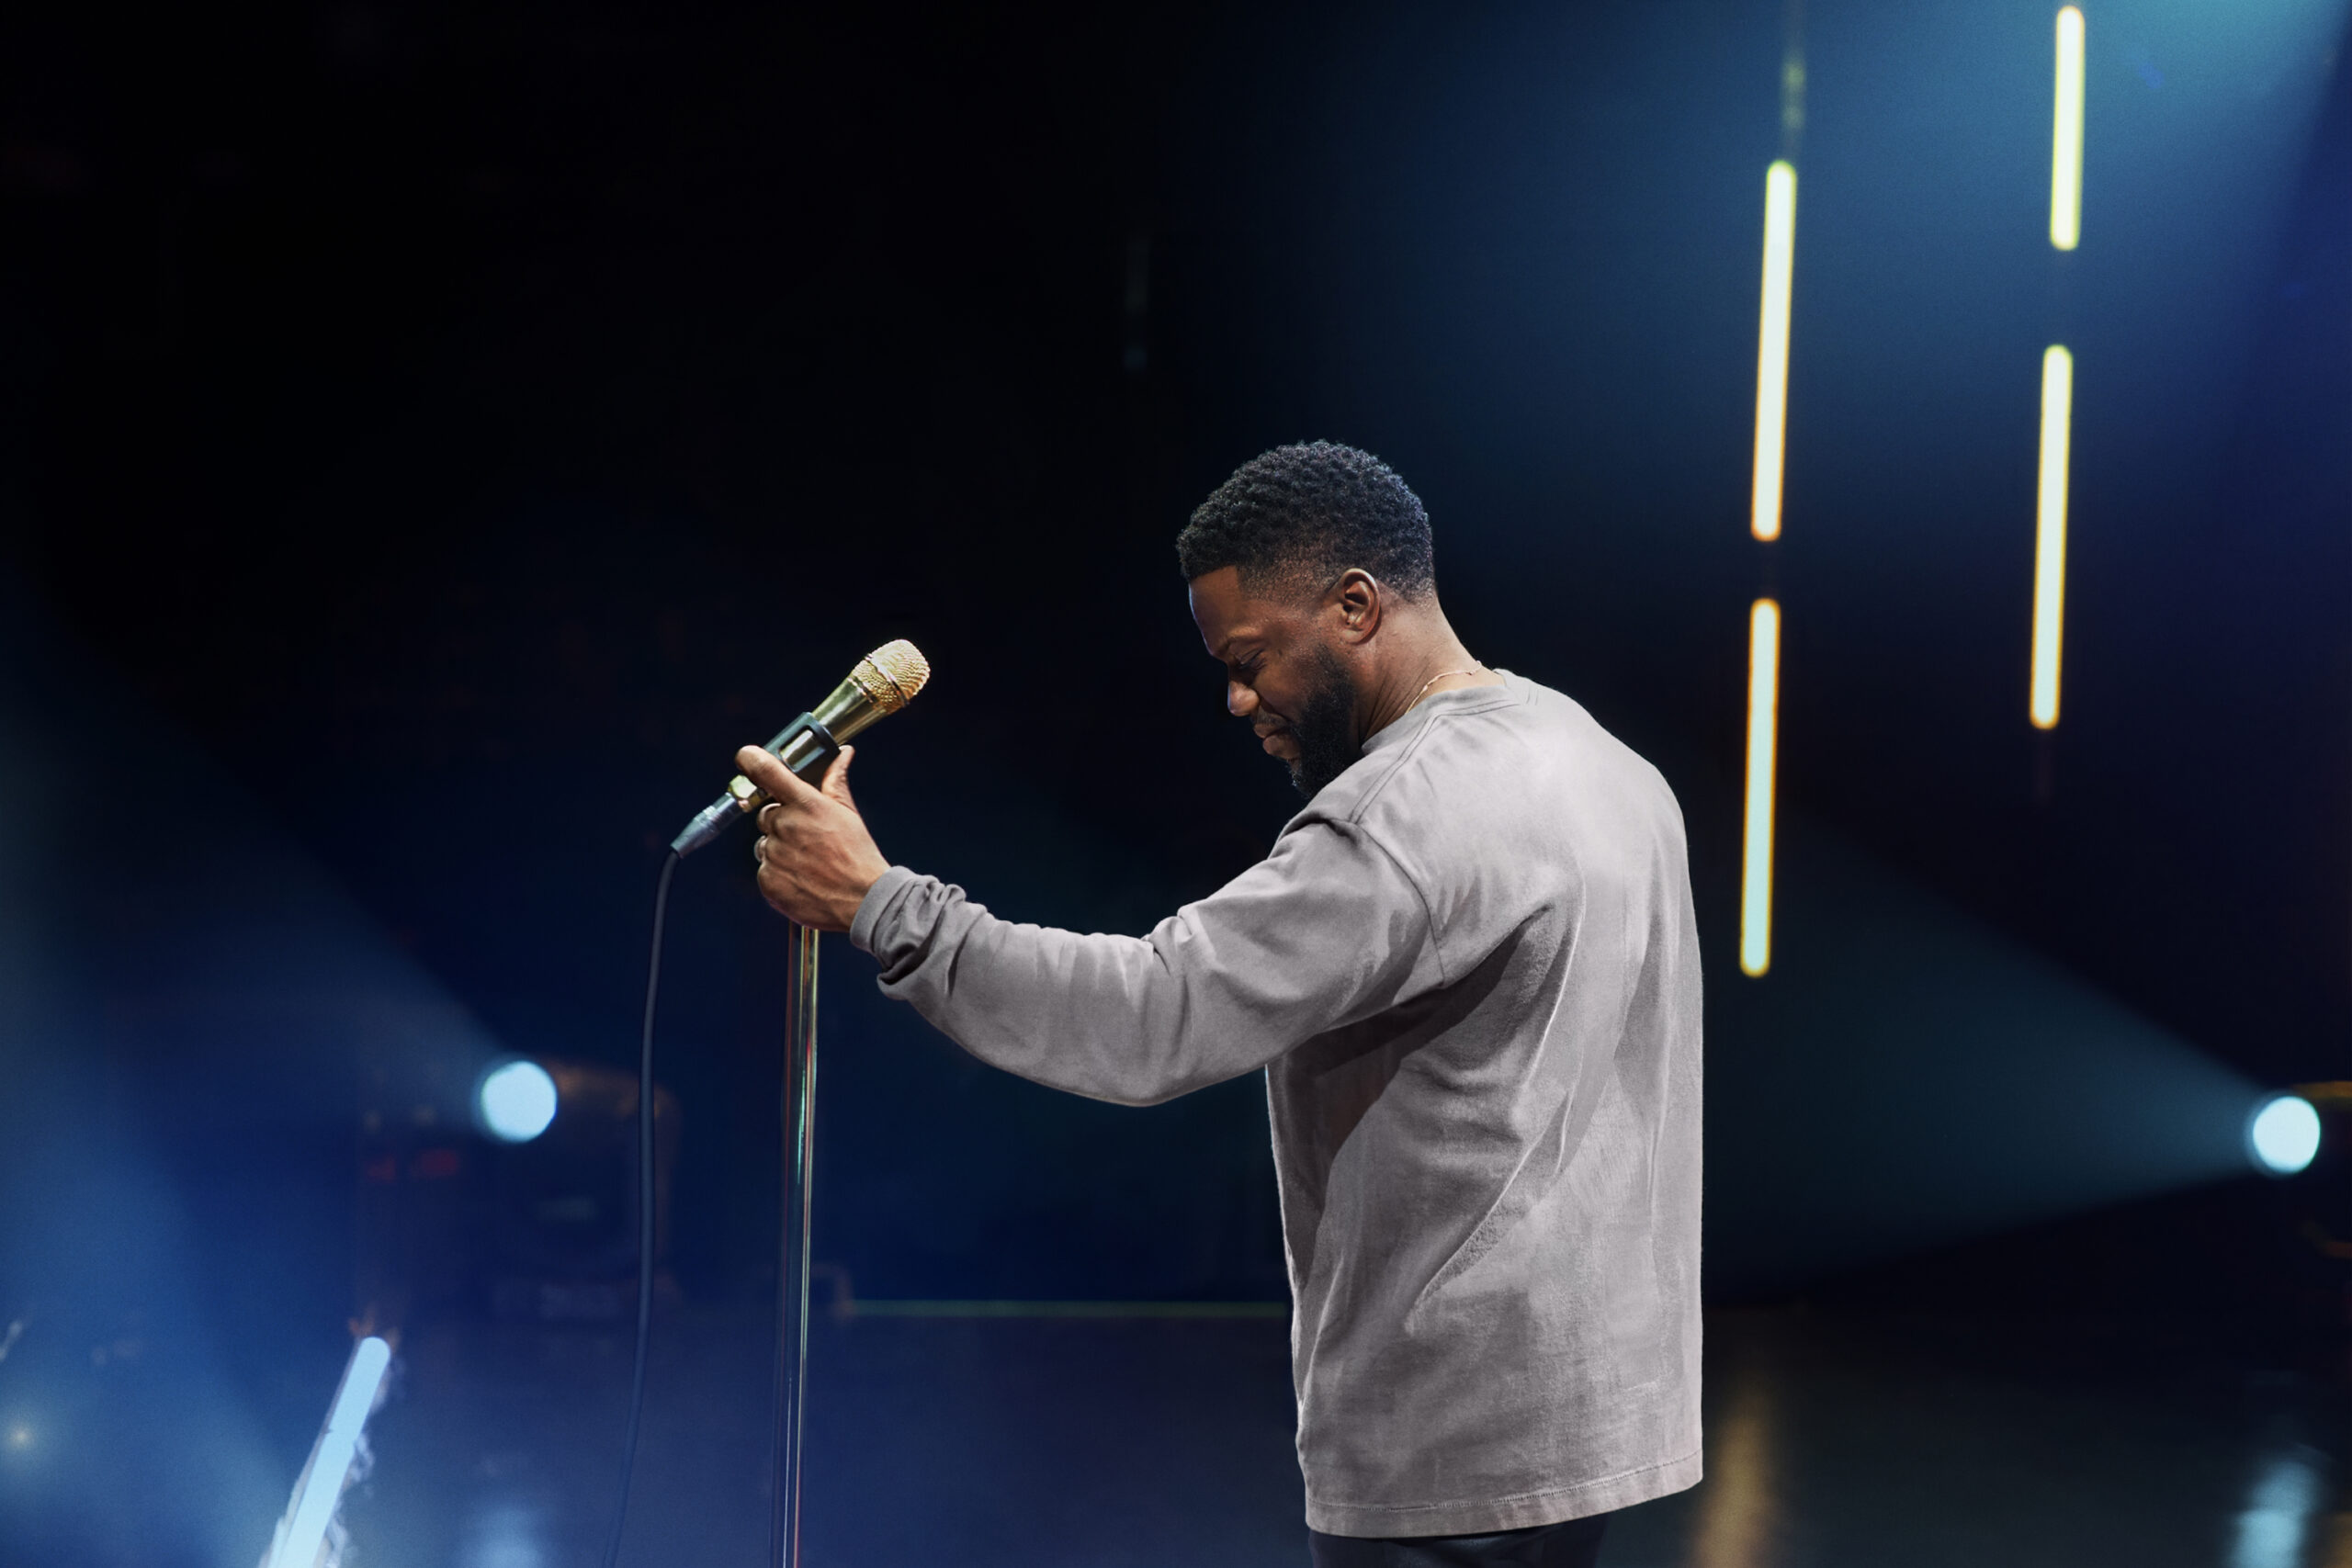 Kevin Hart is a part of the new Icon experience that Airbnb is offering. pictured: Kevin Hart on stage